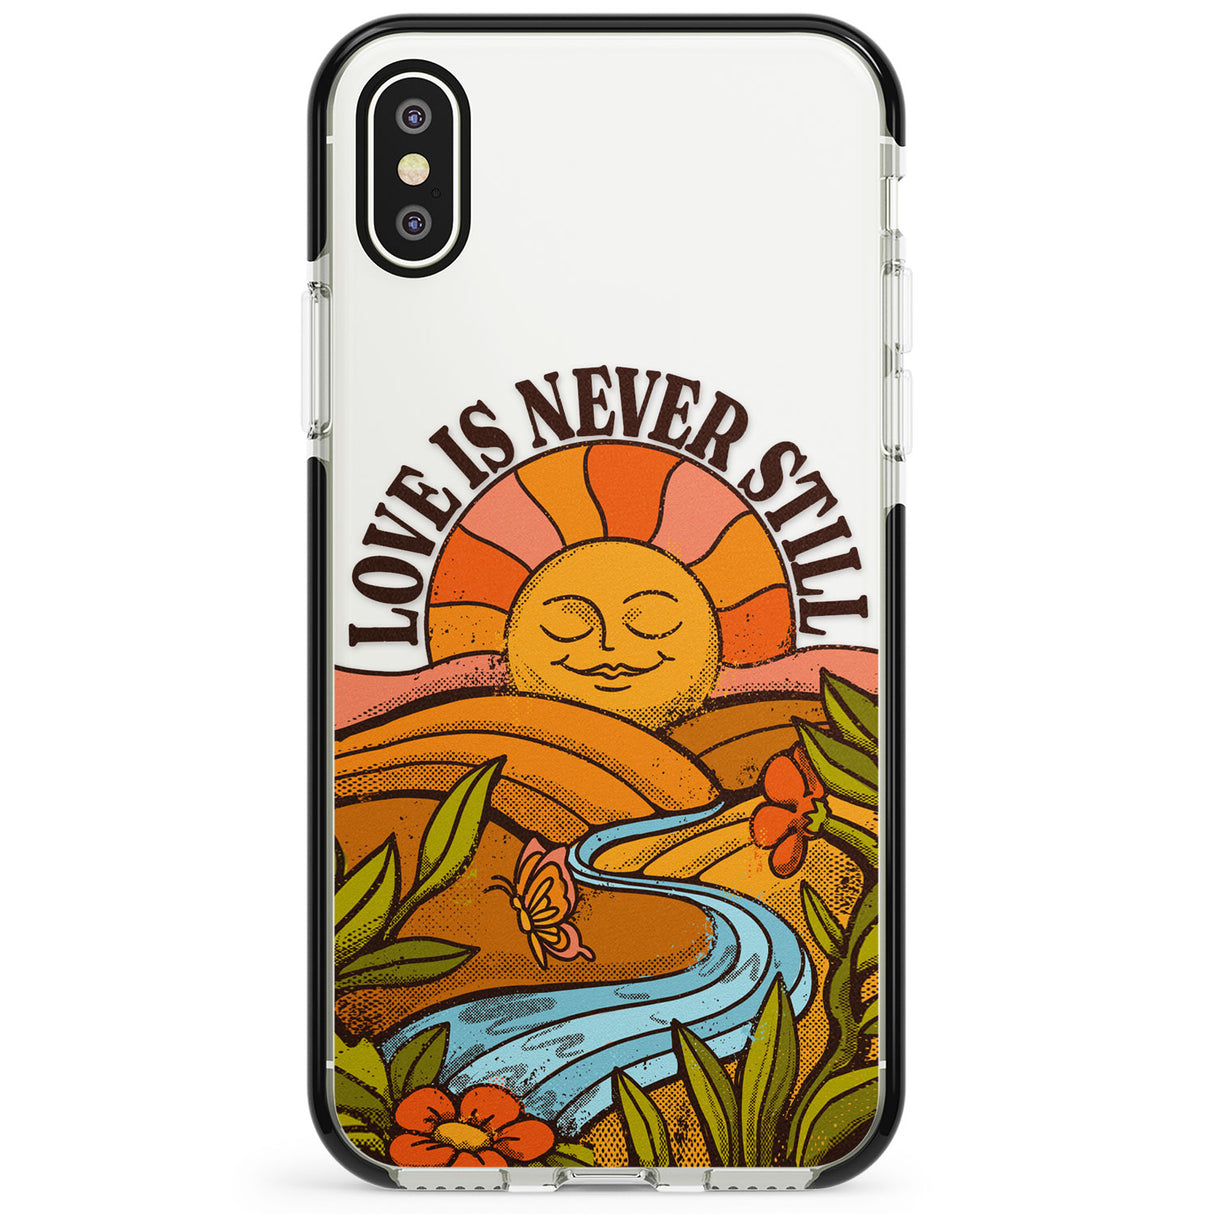 Love is Never Still Phone Case for iPhone X XS Max XR